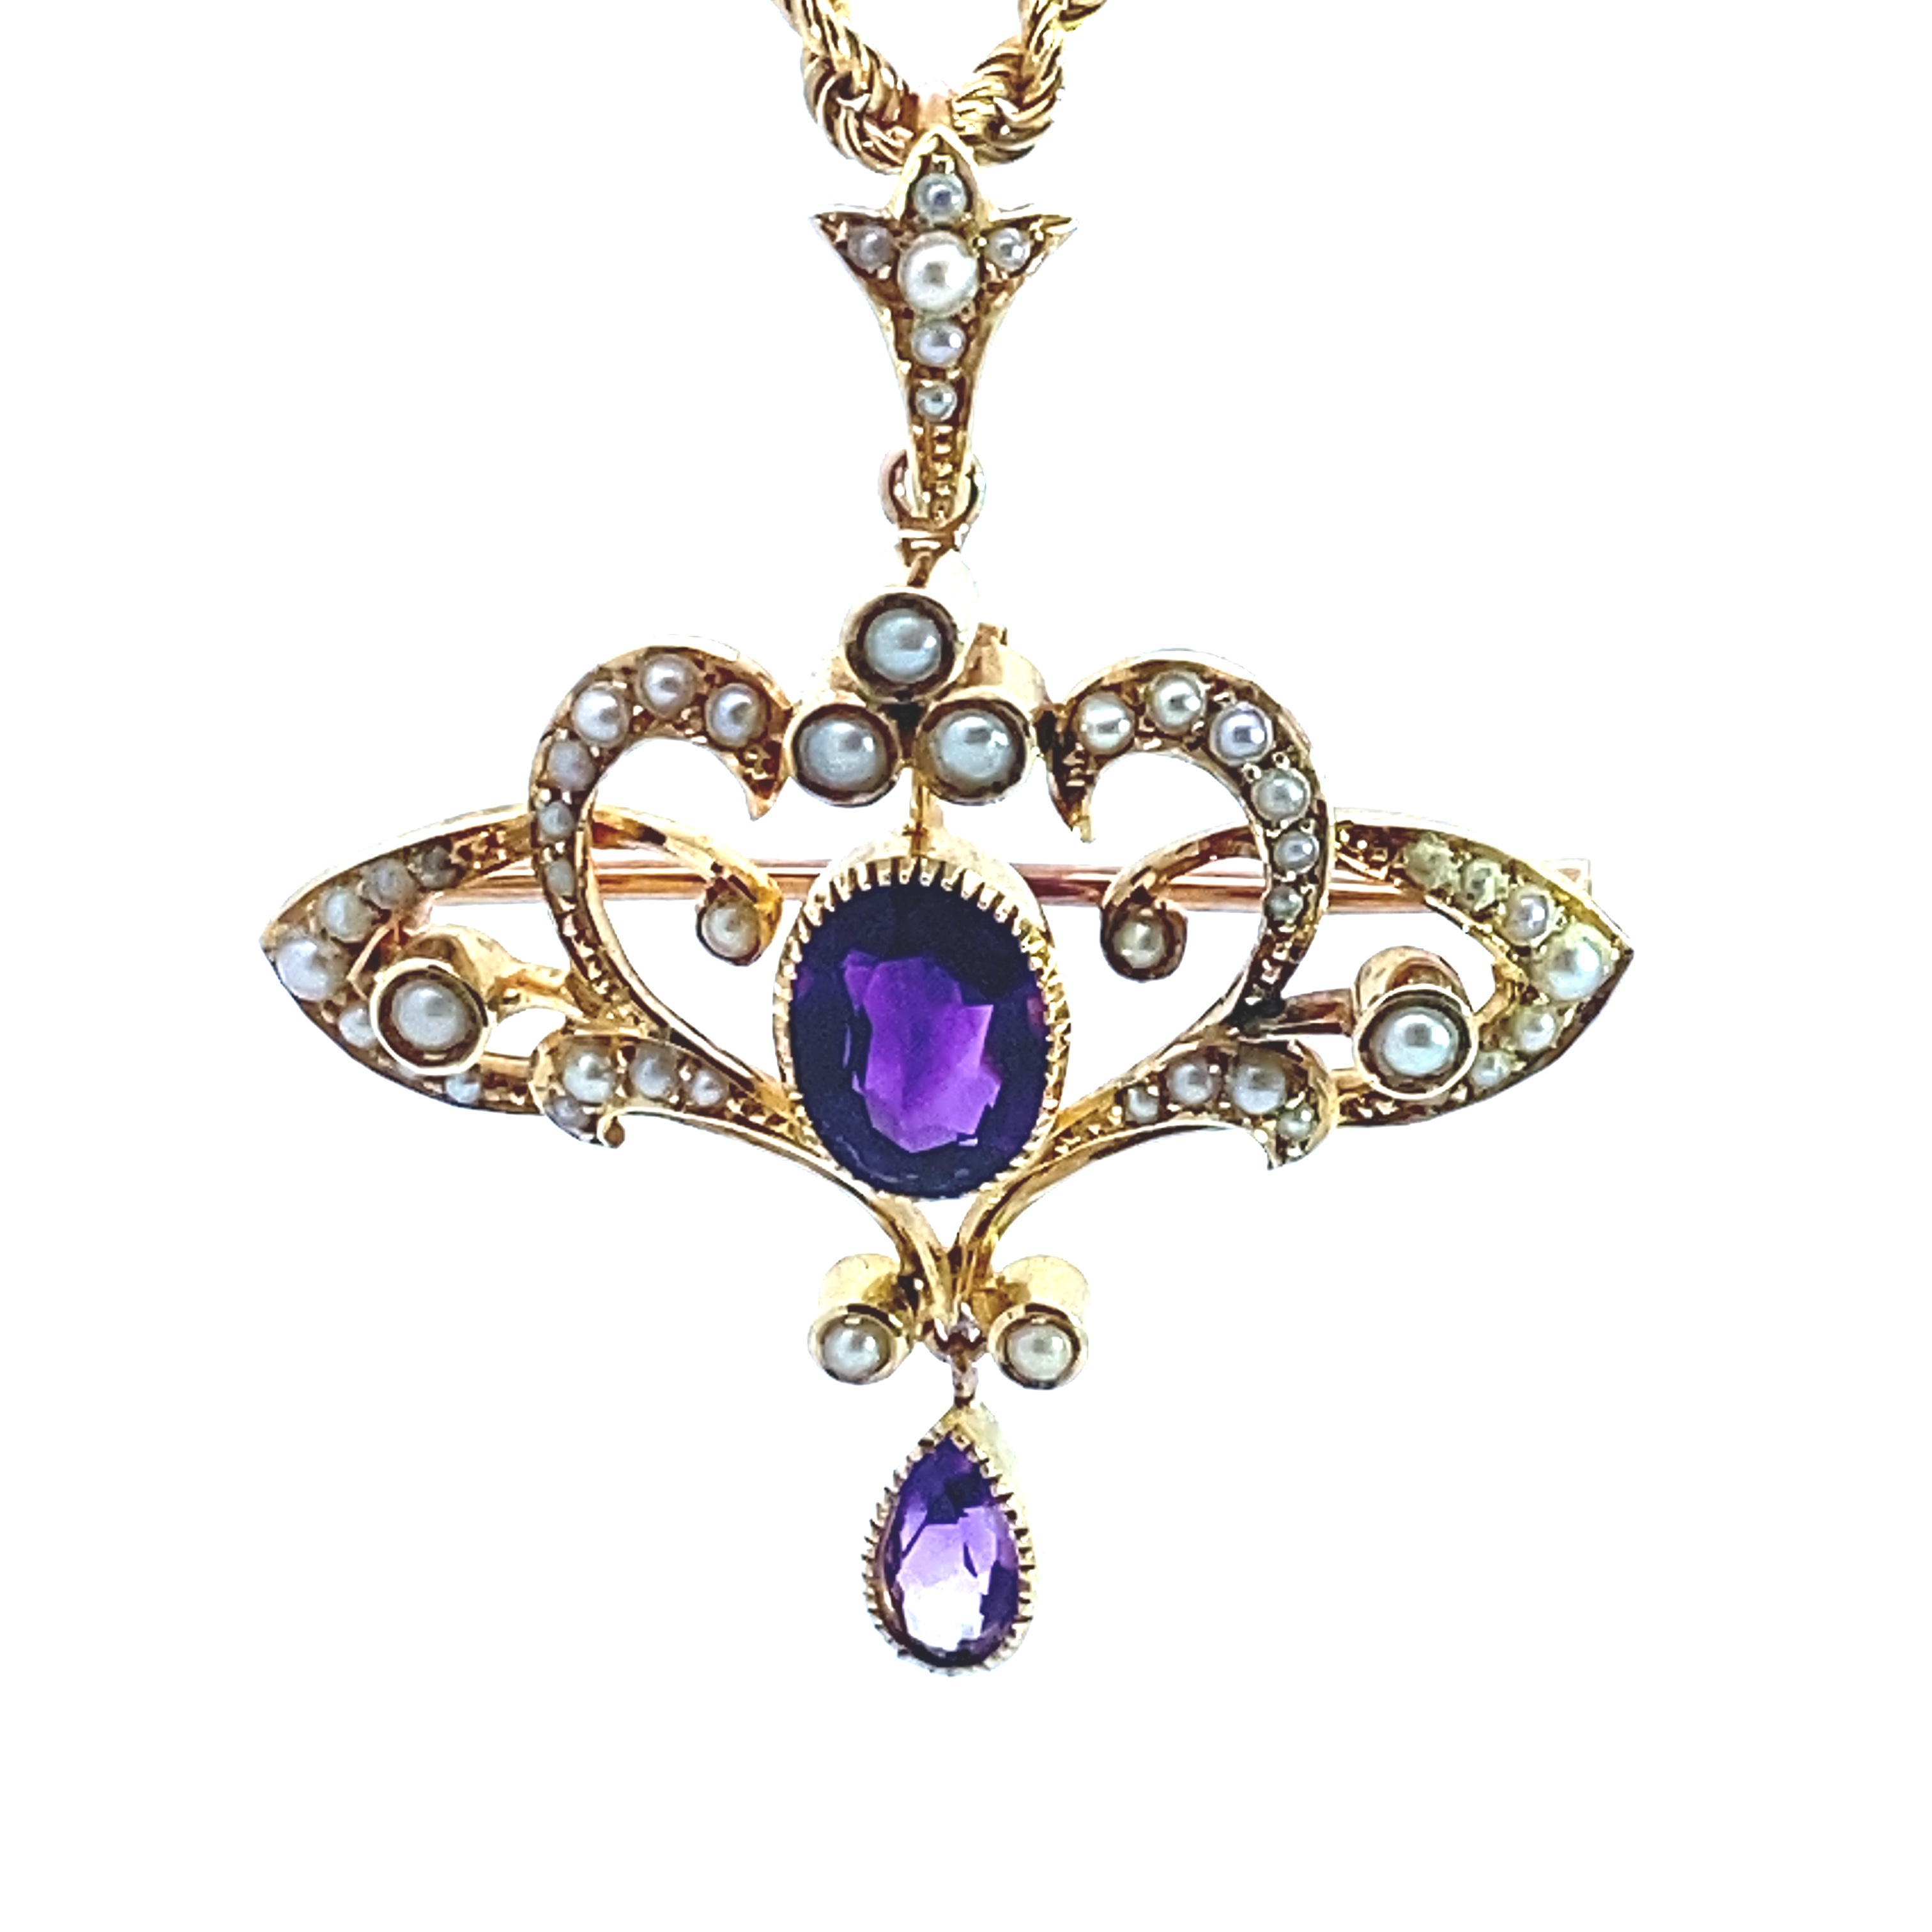 A Beautiful Amethyst and Pearl Pendant